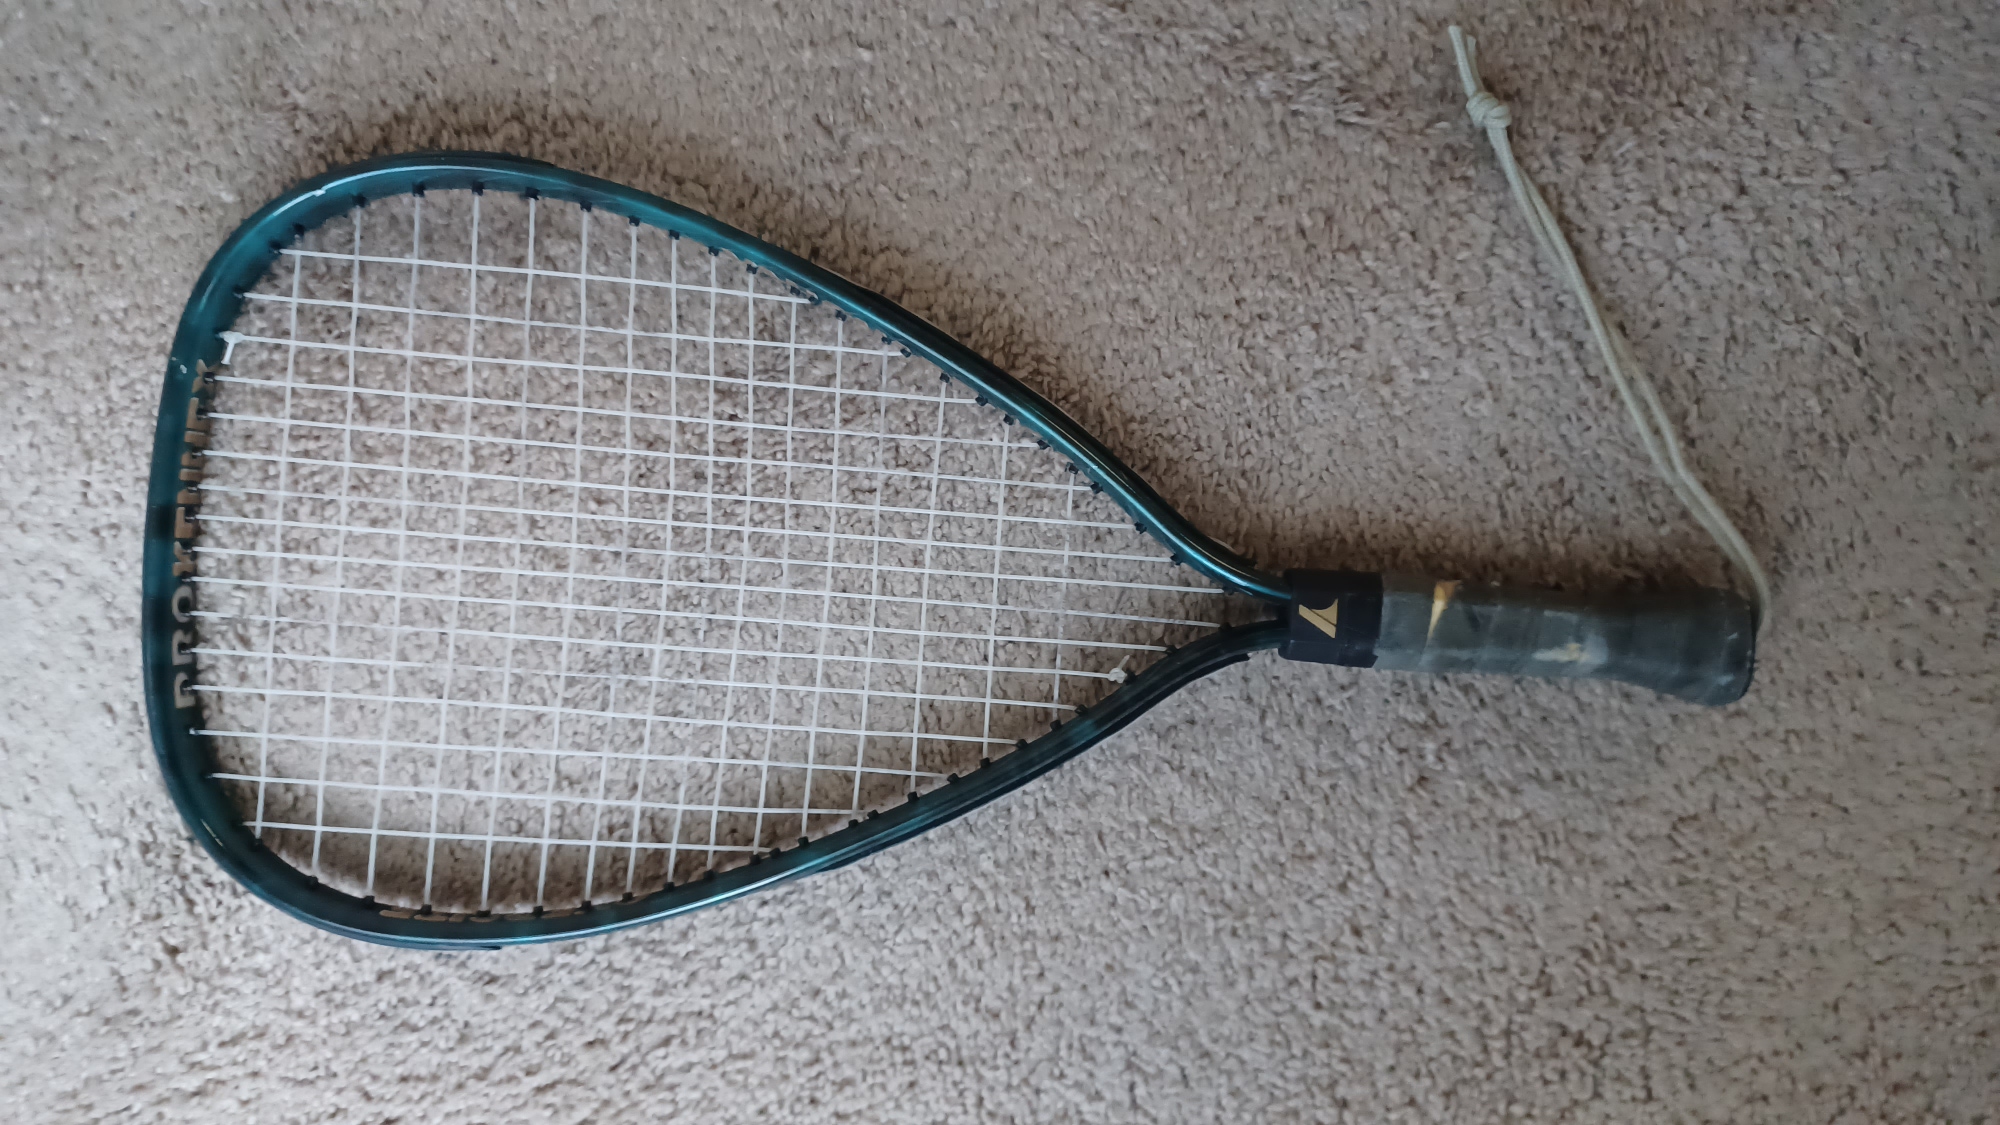 Used Pro Kennex Vanguard 100 SuperWidebody Racquetball Racket with Cover